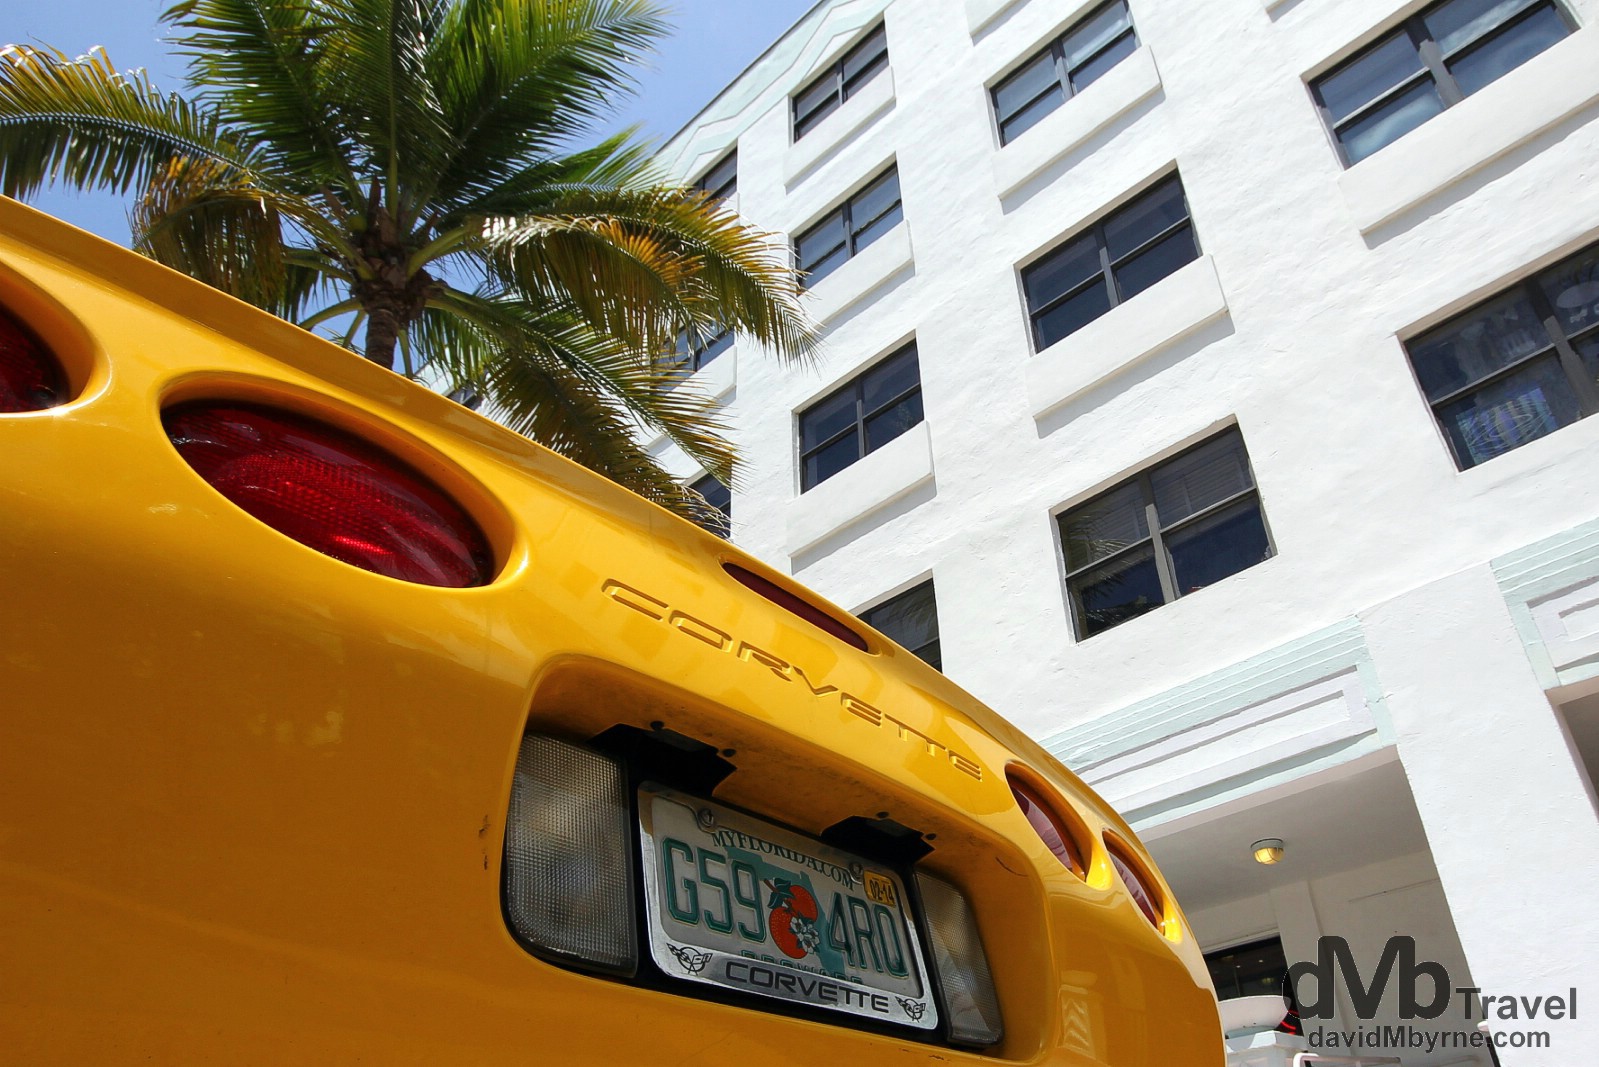 A corvette parked outside the Van Ness Hotel on Ocean Drive, South Beach, Miami, Florida, USA. July 8th 2013.